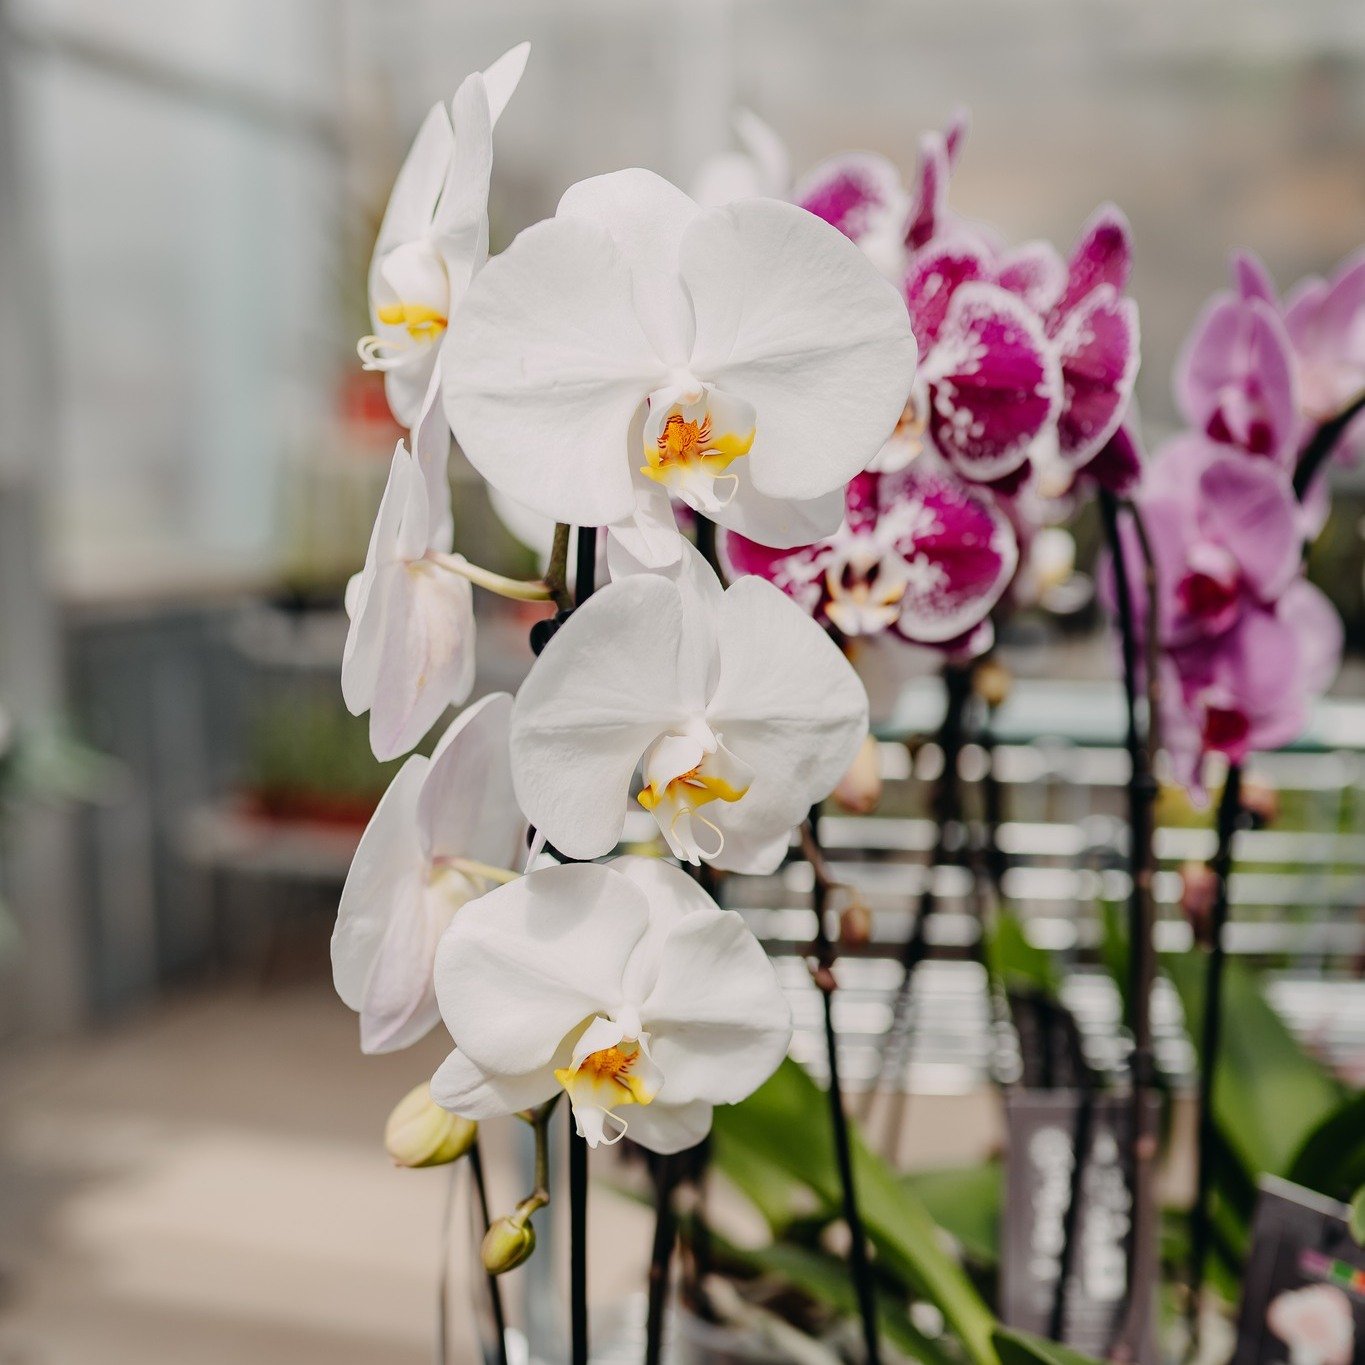 Look at these beauties! Orchids make a great Mother's Day Gift! 😍

#orchids #mothersday #eauclaire #gifts